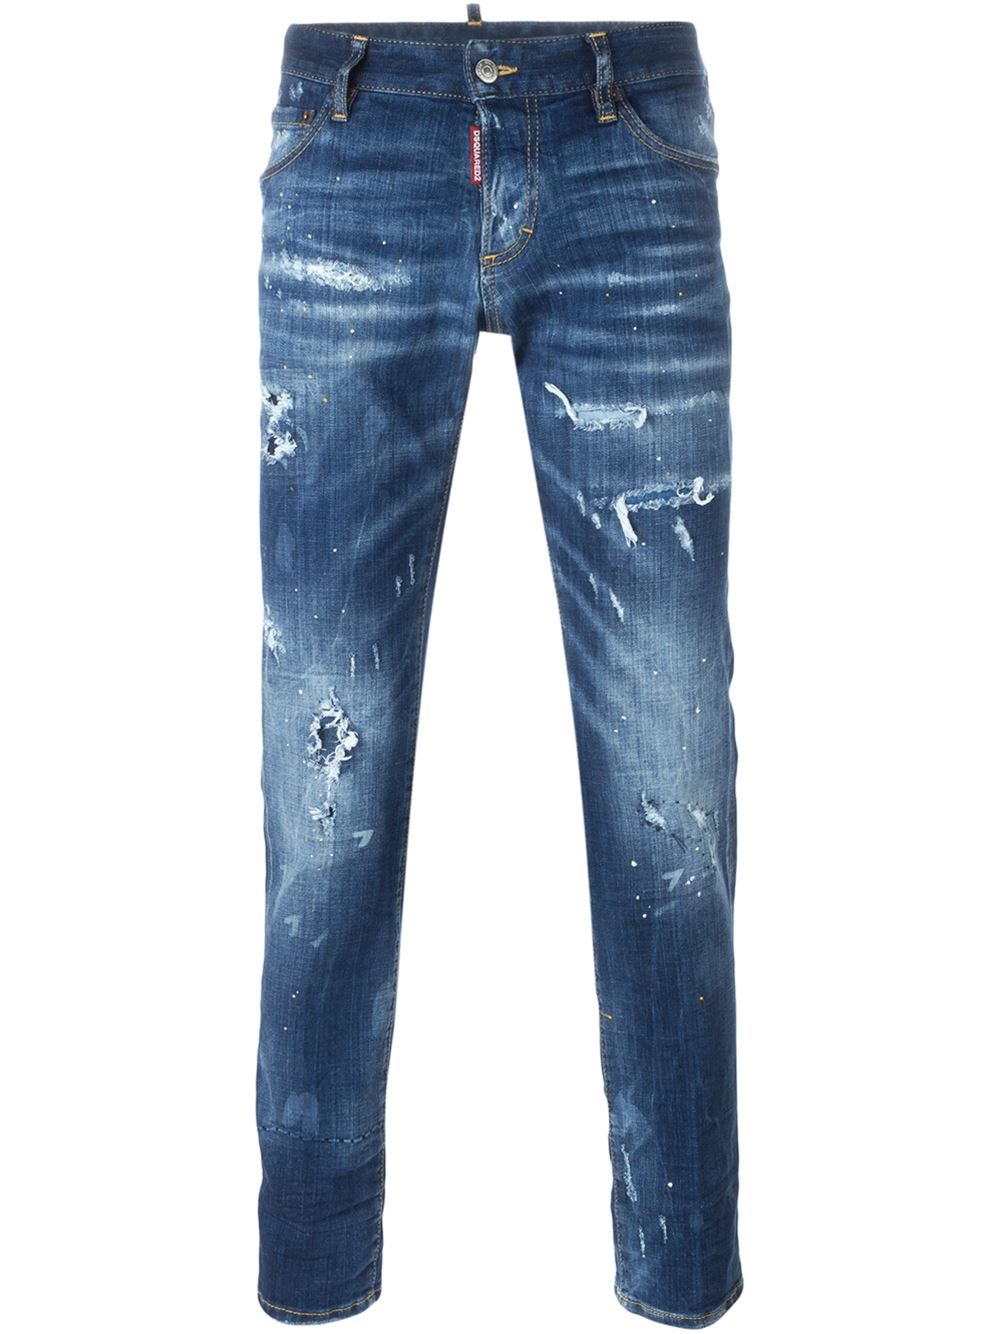 jeans dsquared homme 2016